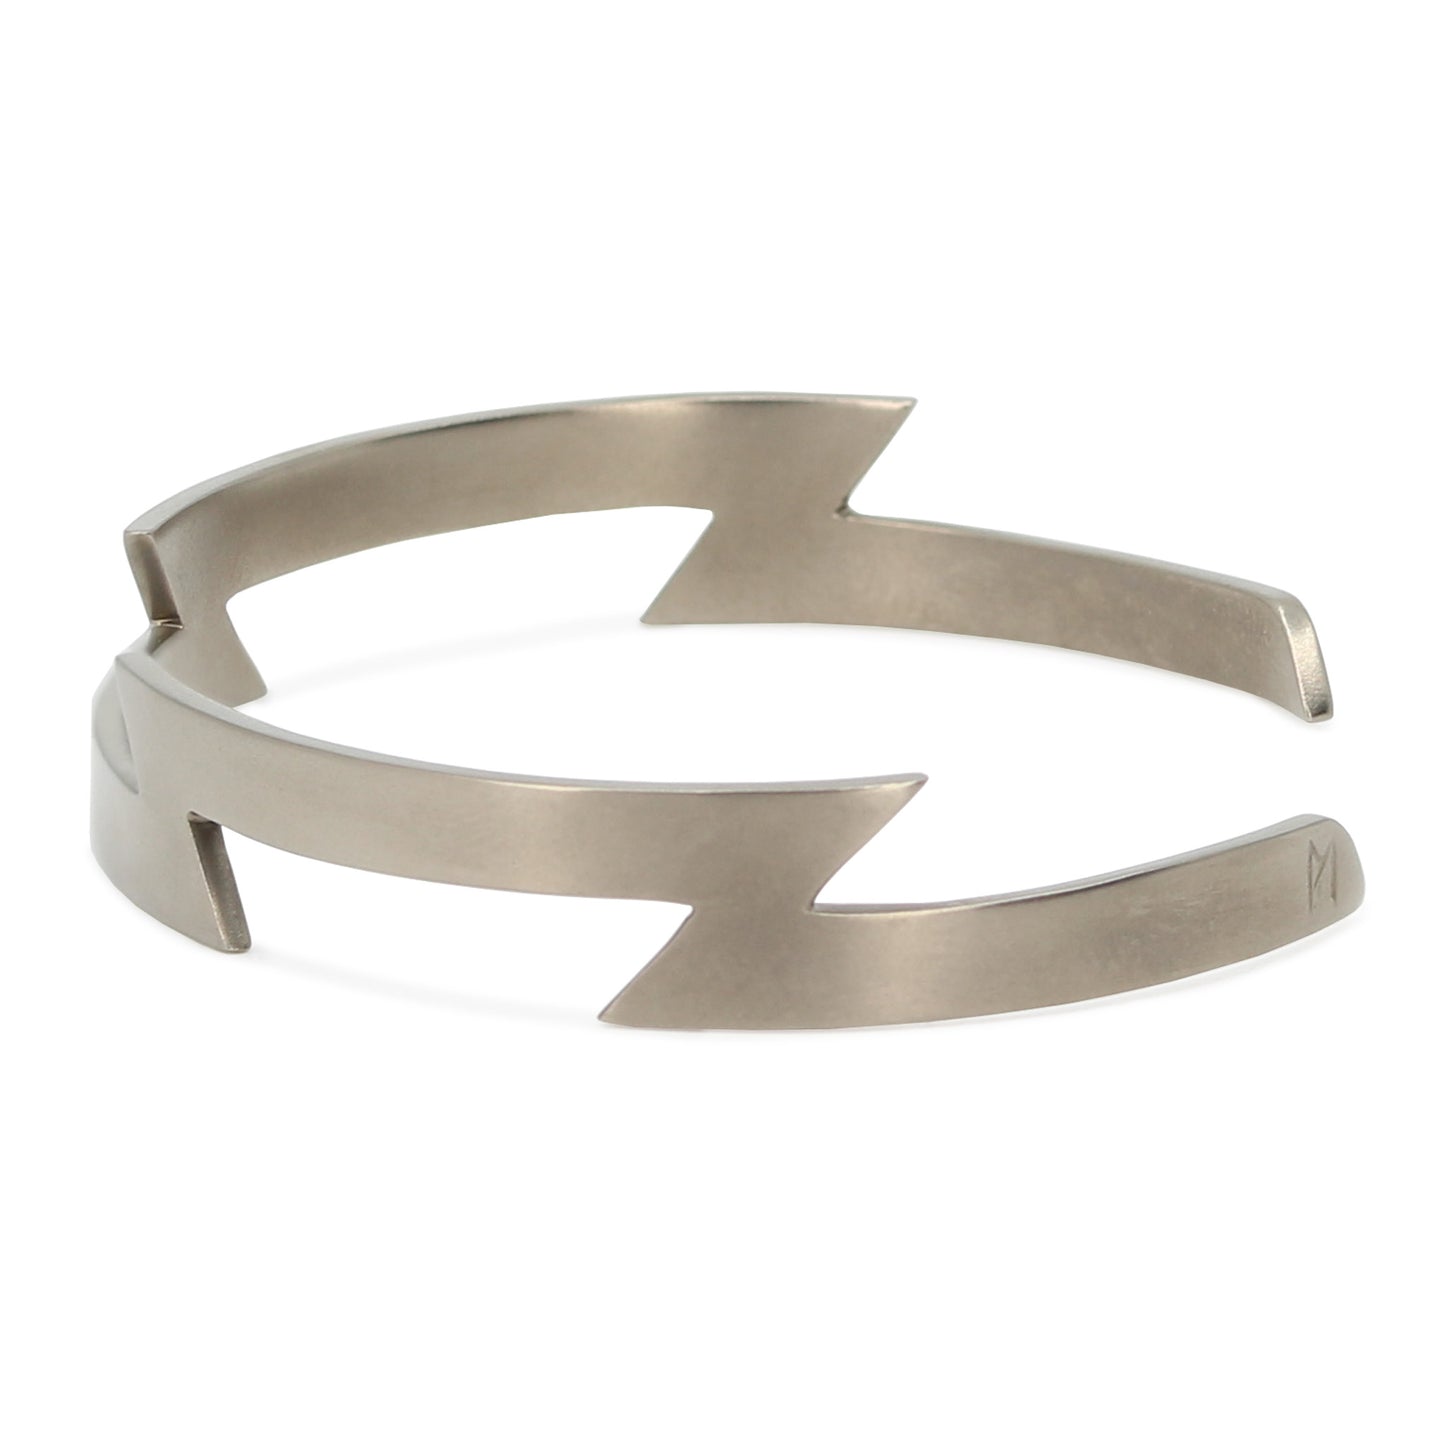 Side view of Maxwell Pontail's angular titanium bracelet with subtle 'M' engraving.